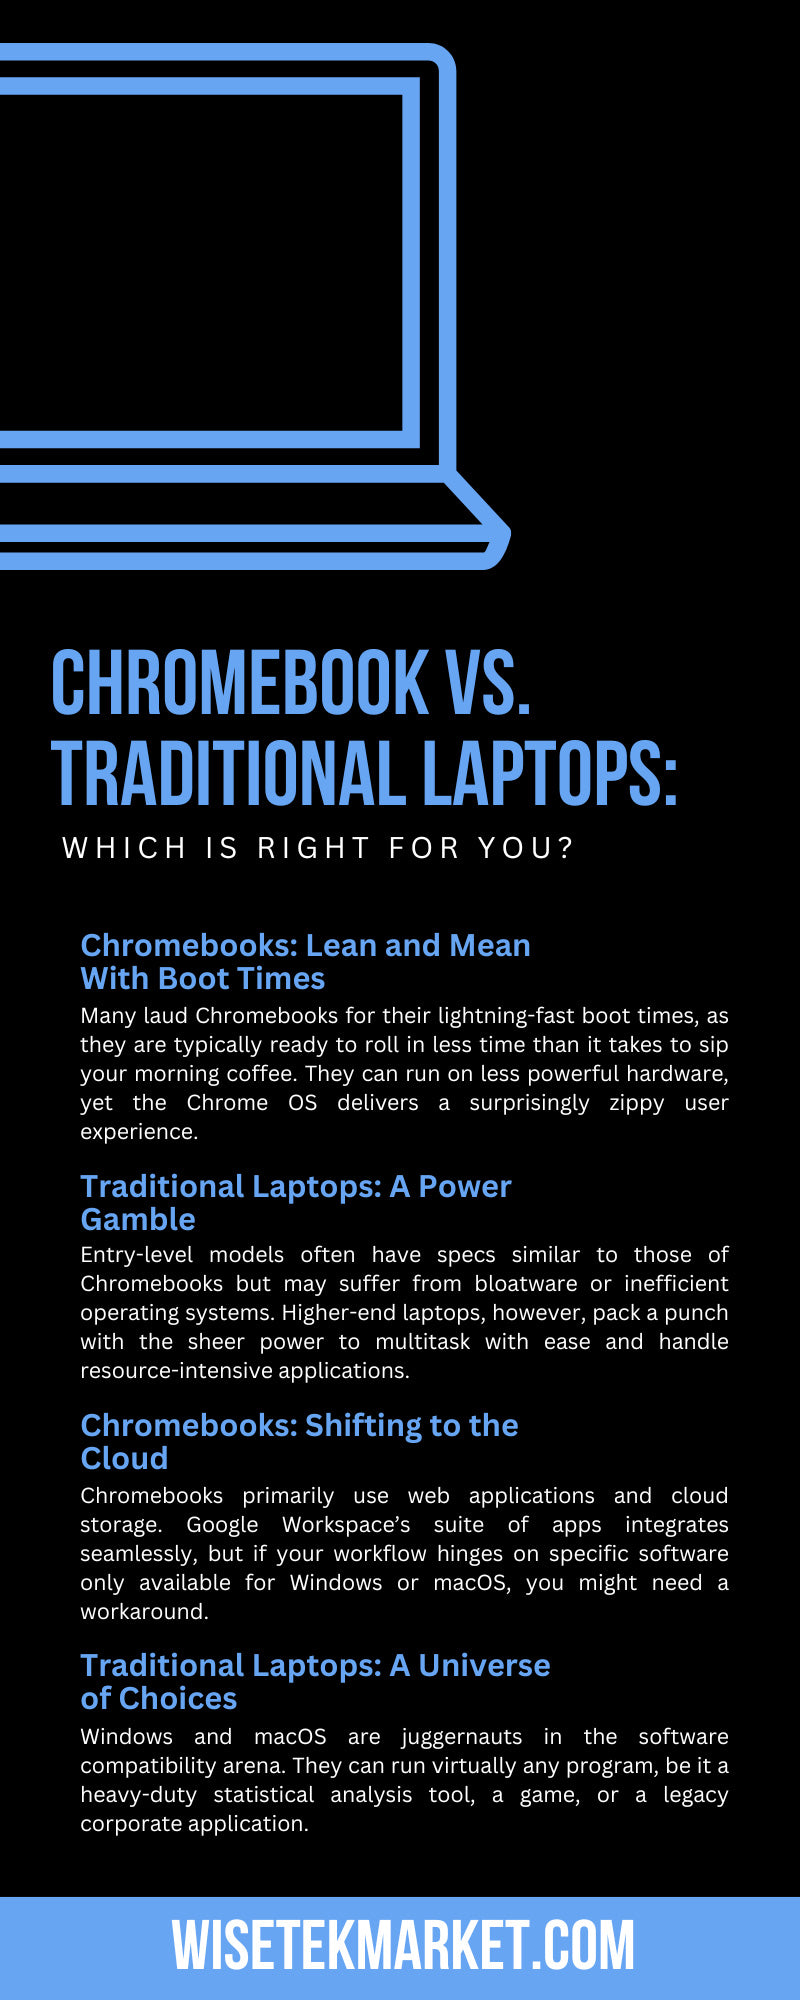 Chromebook vs. Traditional Laptops: Which Is Right for You?